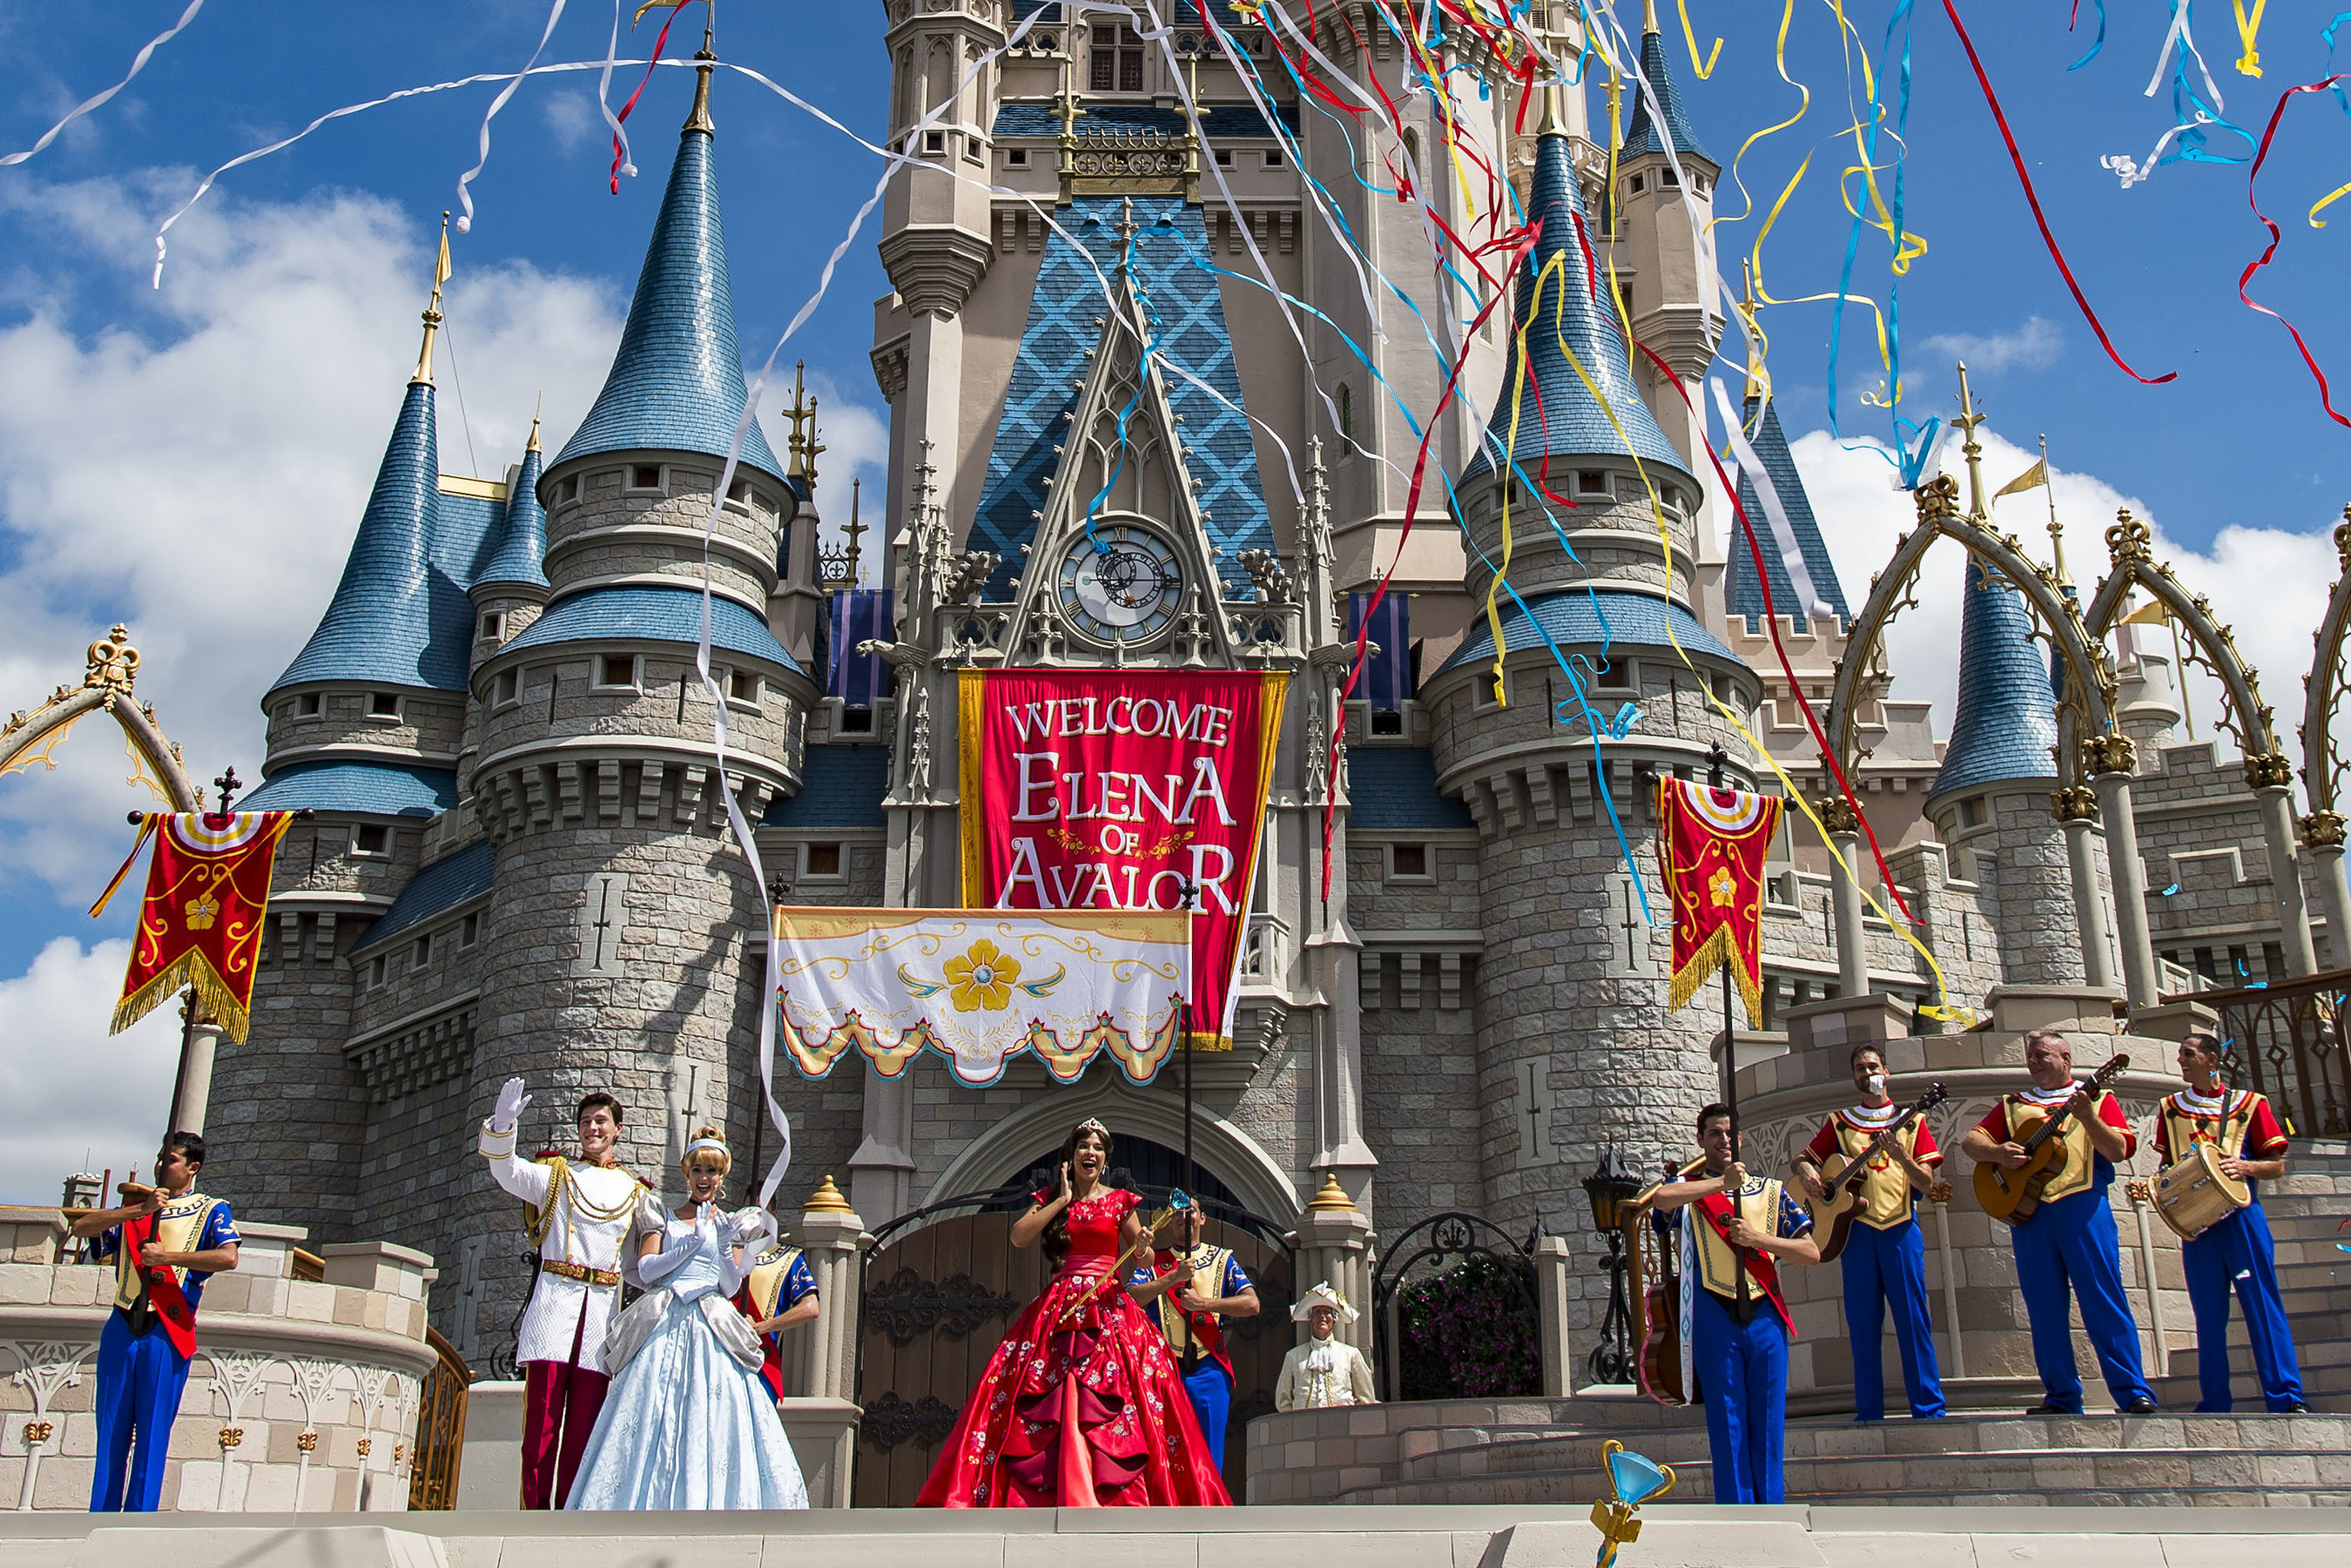 Princess Elena of Avalor, the first Latin-inspired Disney princess, receives a royal welcome on Aug. 11, 2016 during her arrival at Magic Kingdom Park in Lake Buena Vista, Fla. Princess Elena's arrival at Walt Disney World follows the debut of the new Disney Channel animated series, "Elena of Avalor." The adventurous princess appears daily in "The Royal Welcome of Princess Elena" stage show at Magic Kingdom. (Matt Stroshane, photographer)